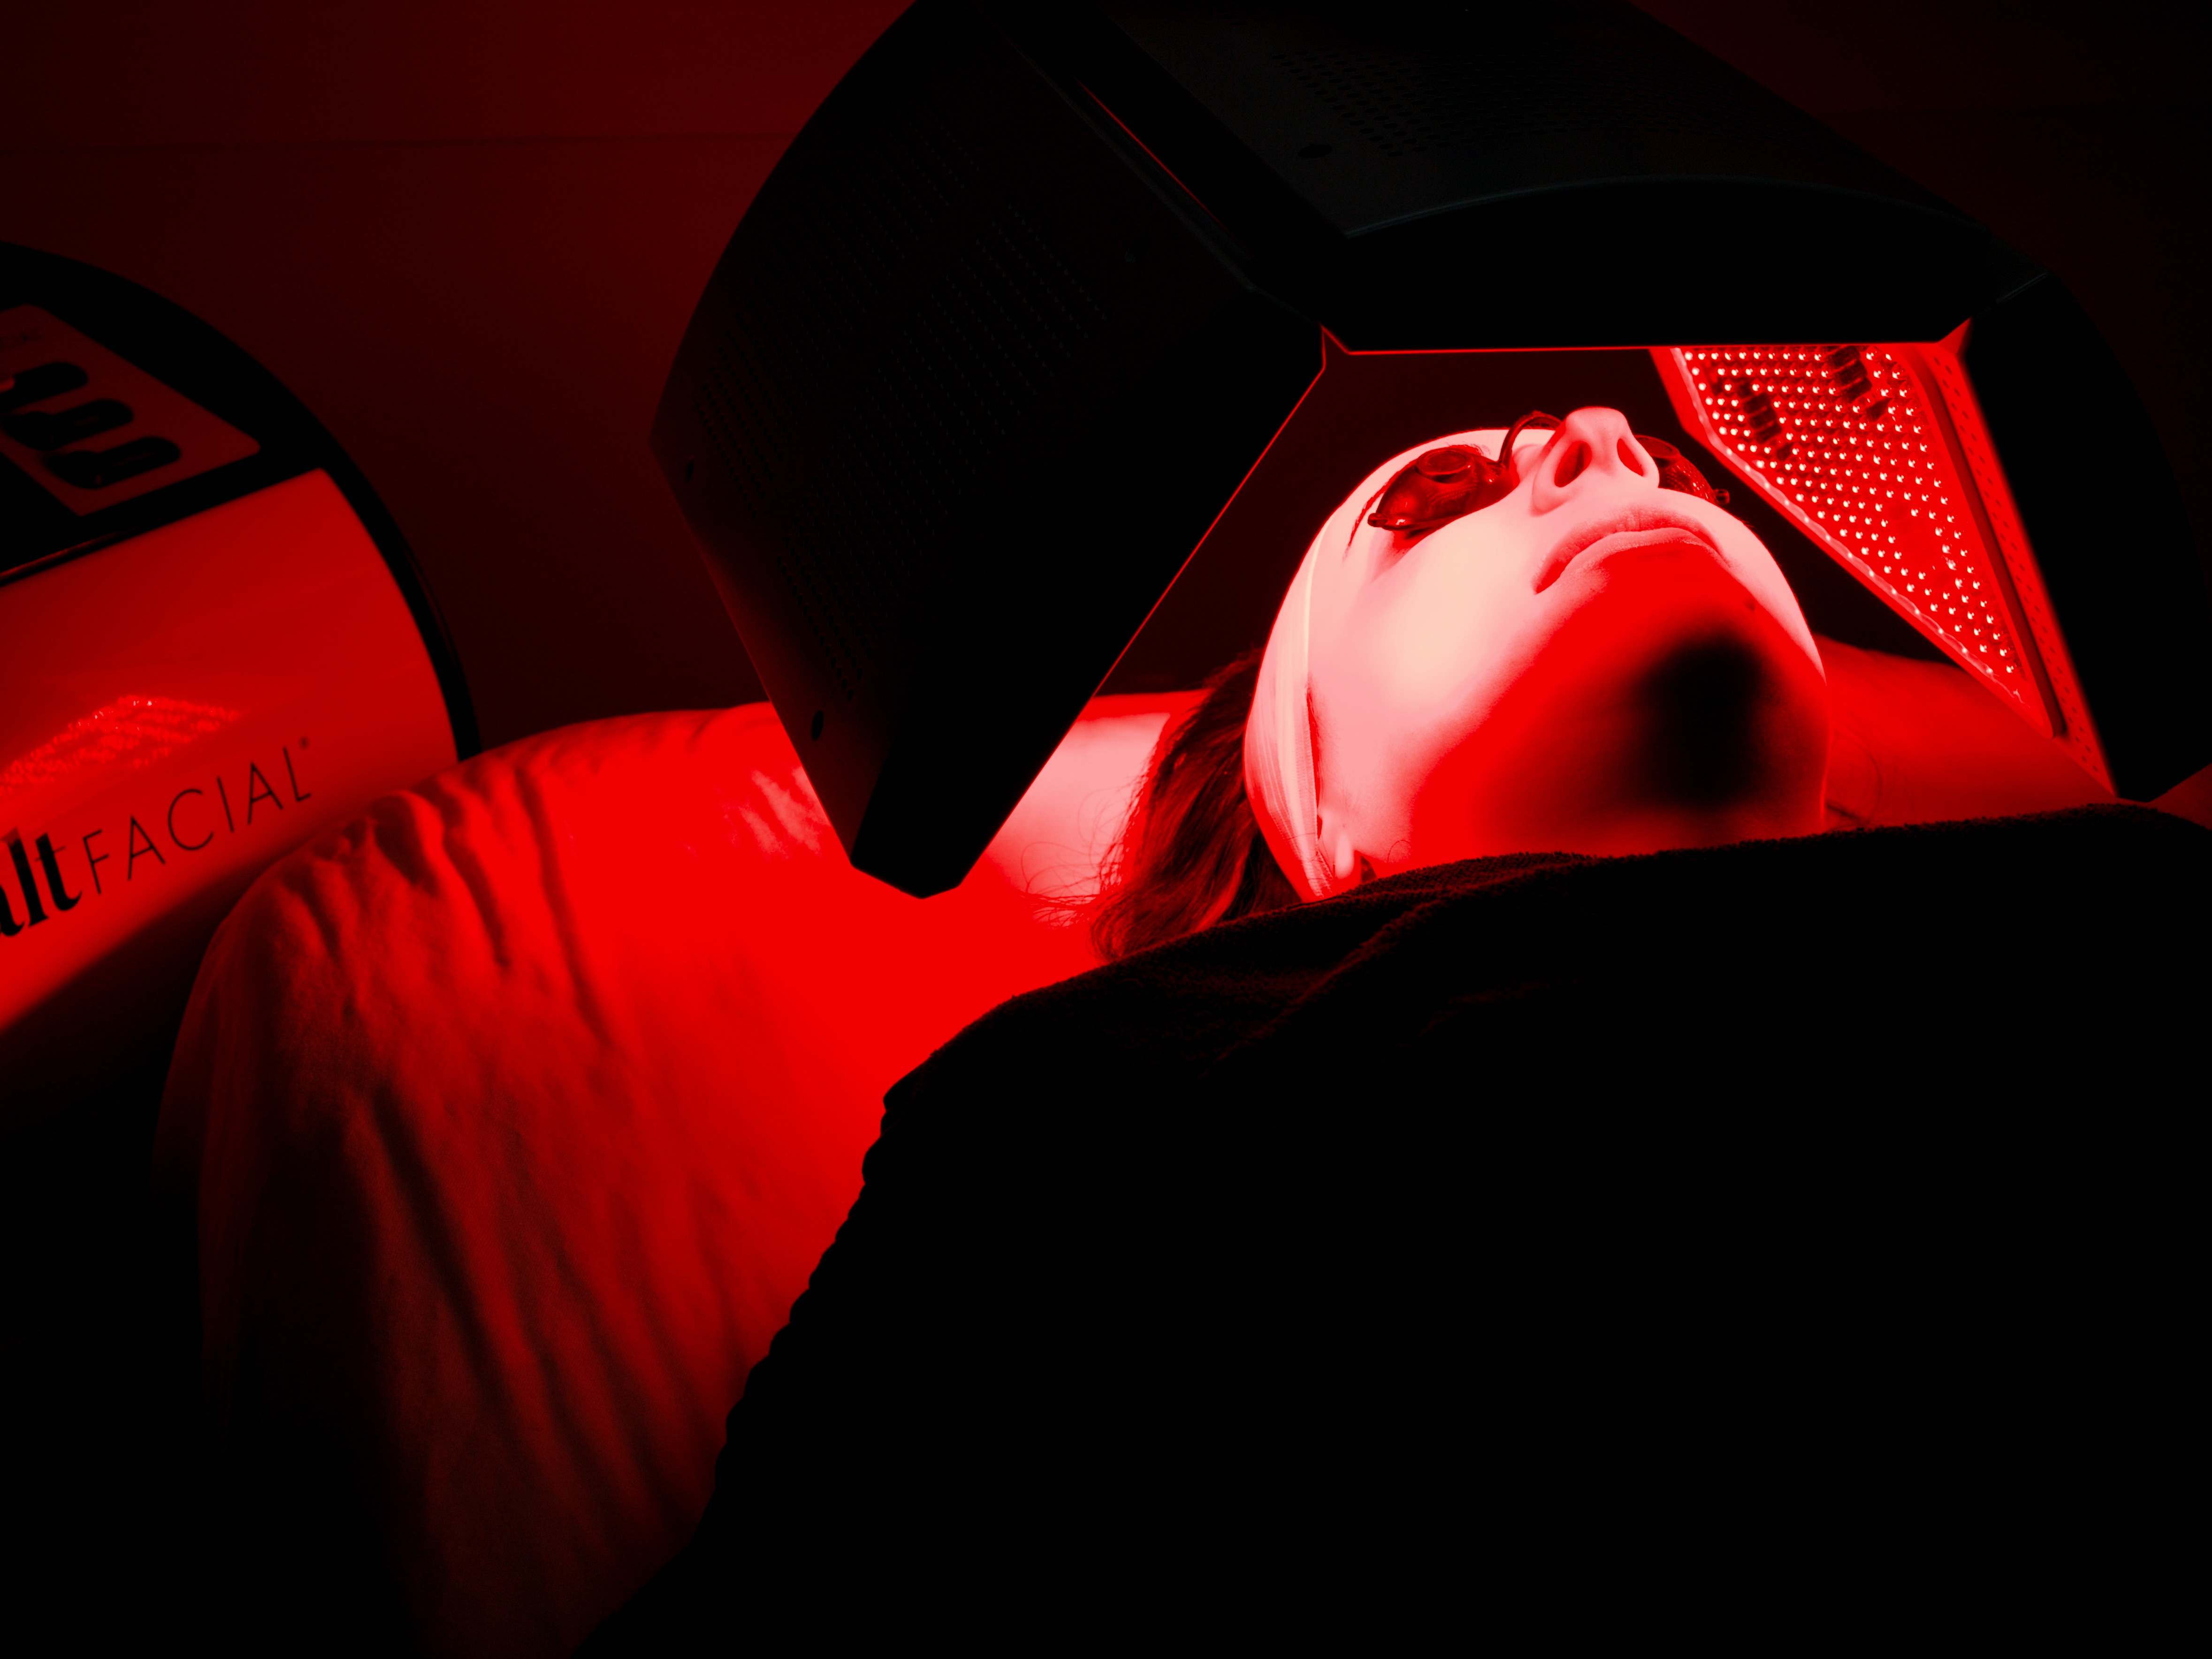 machine being used on woman's face with red light